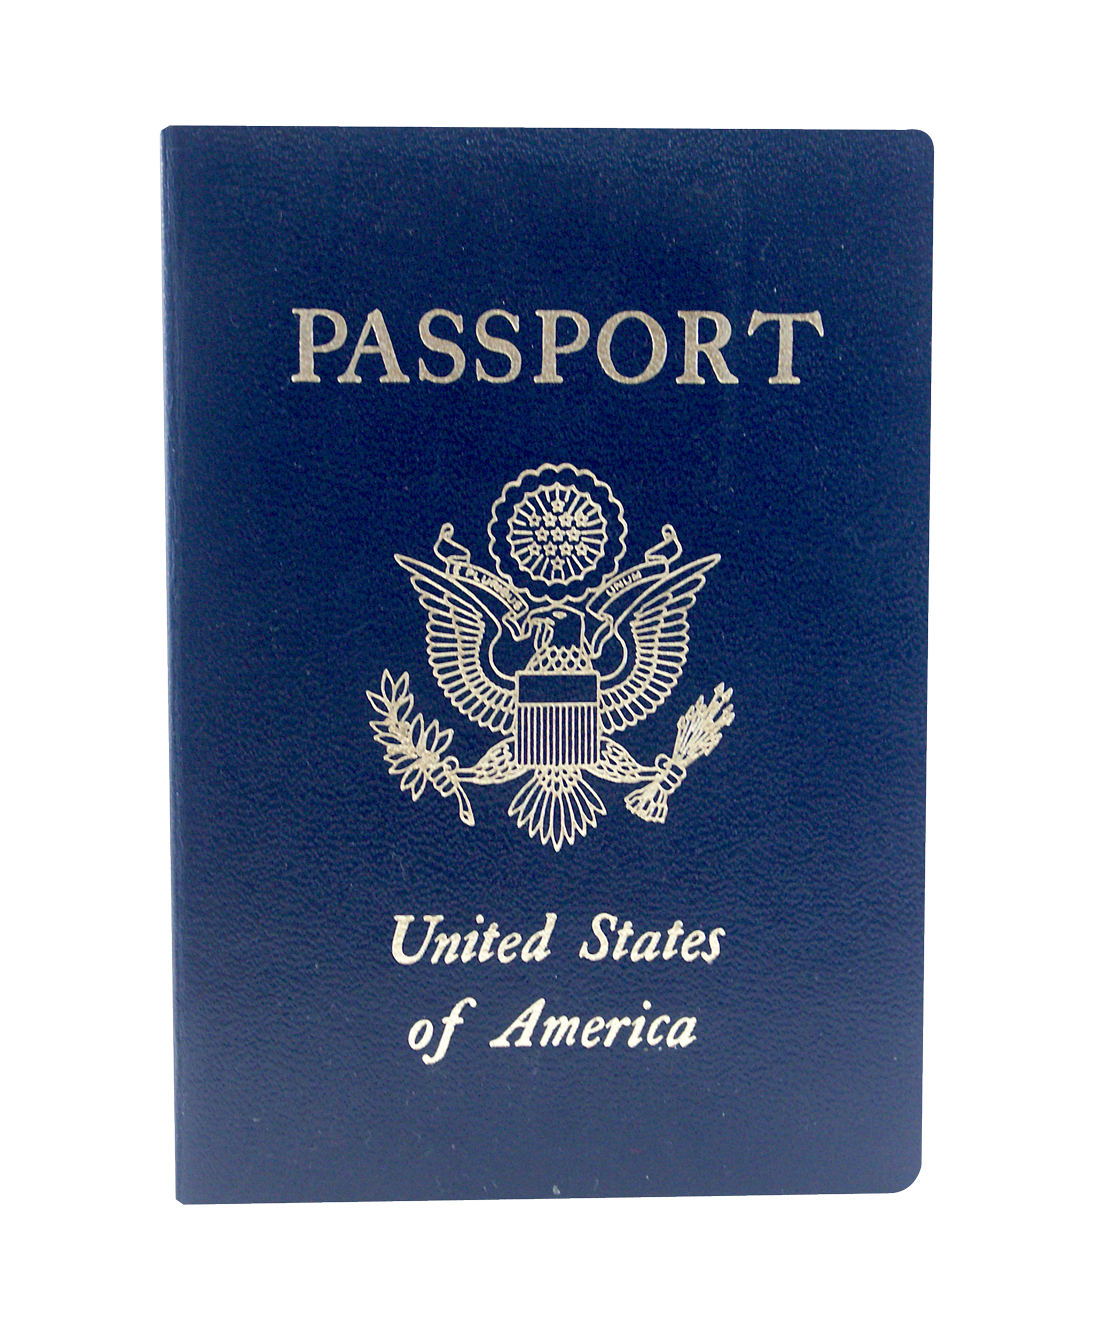 A Blue Passport With A Symbol On It